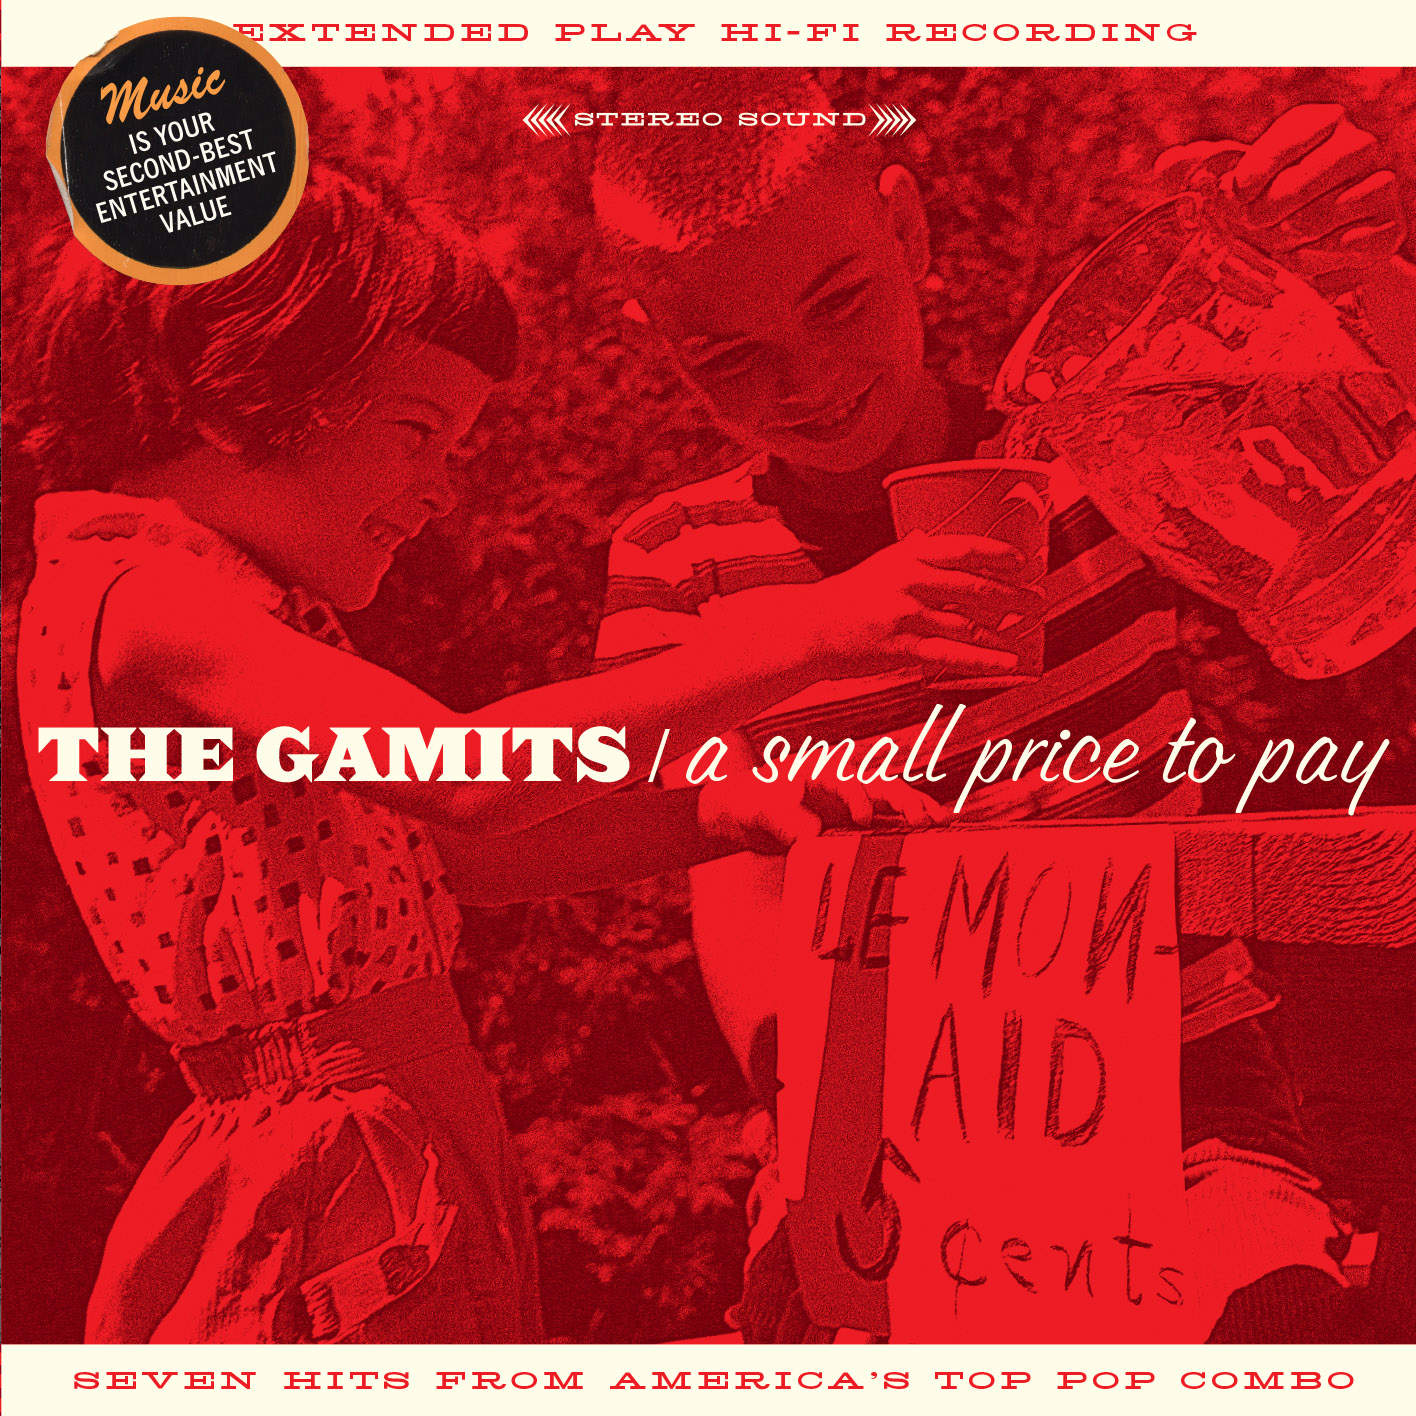 The Gamits - A Small Price to Pay CD cover